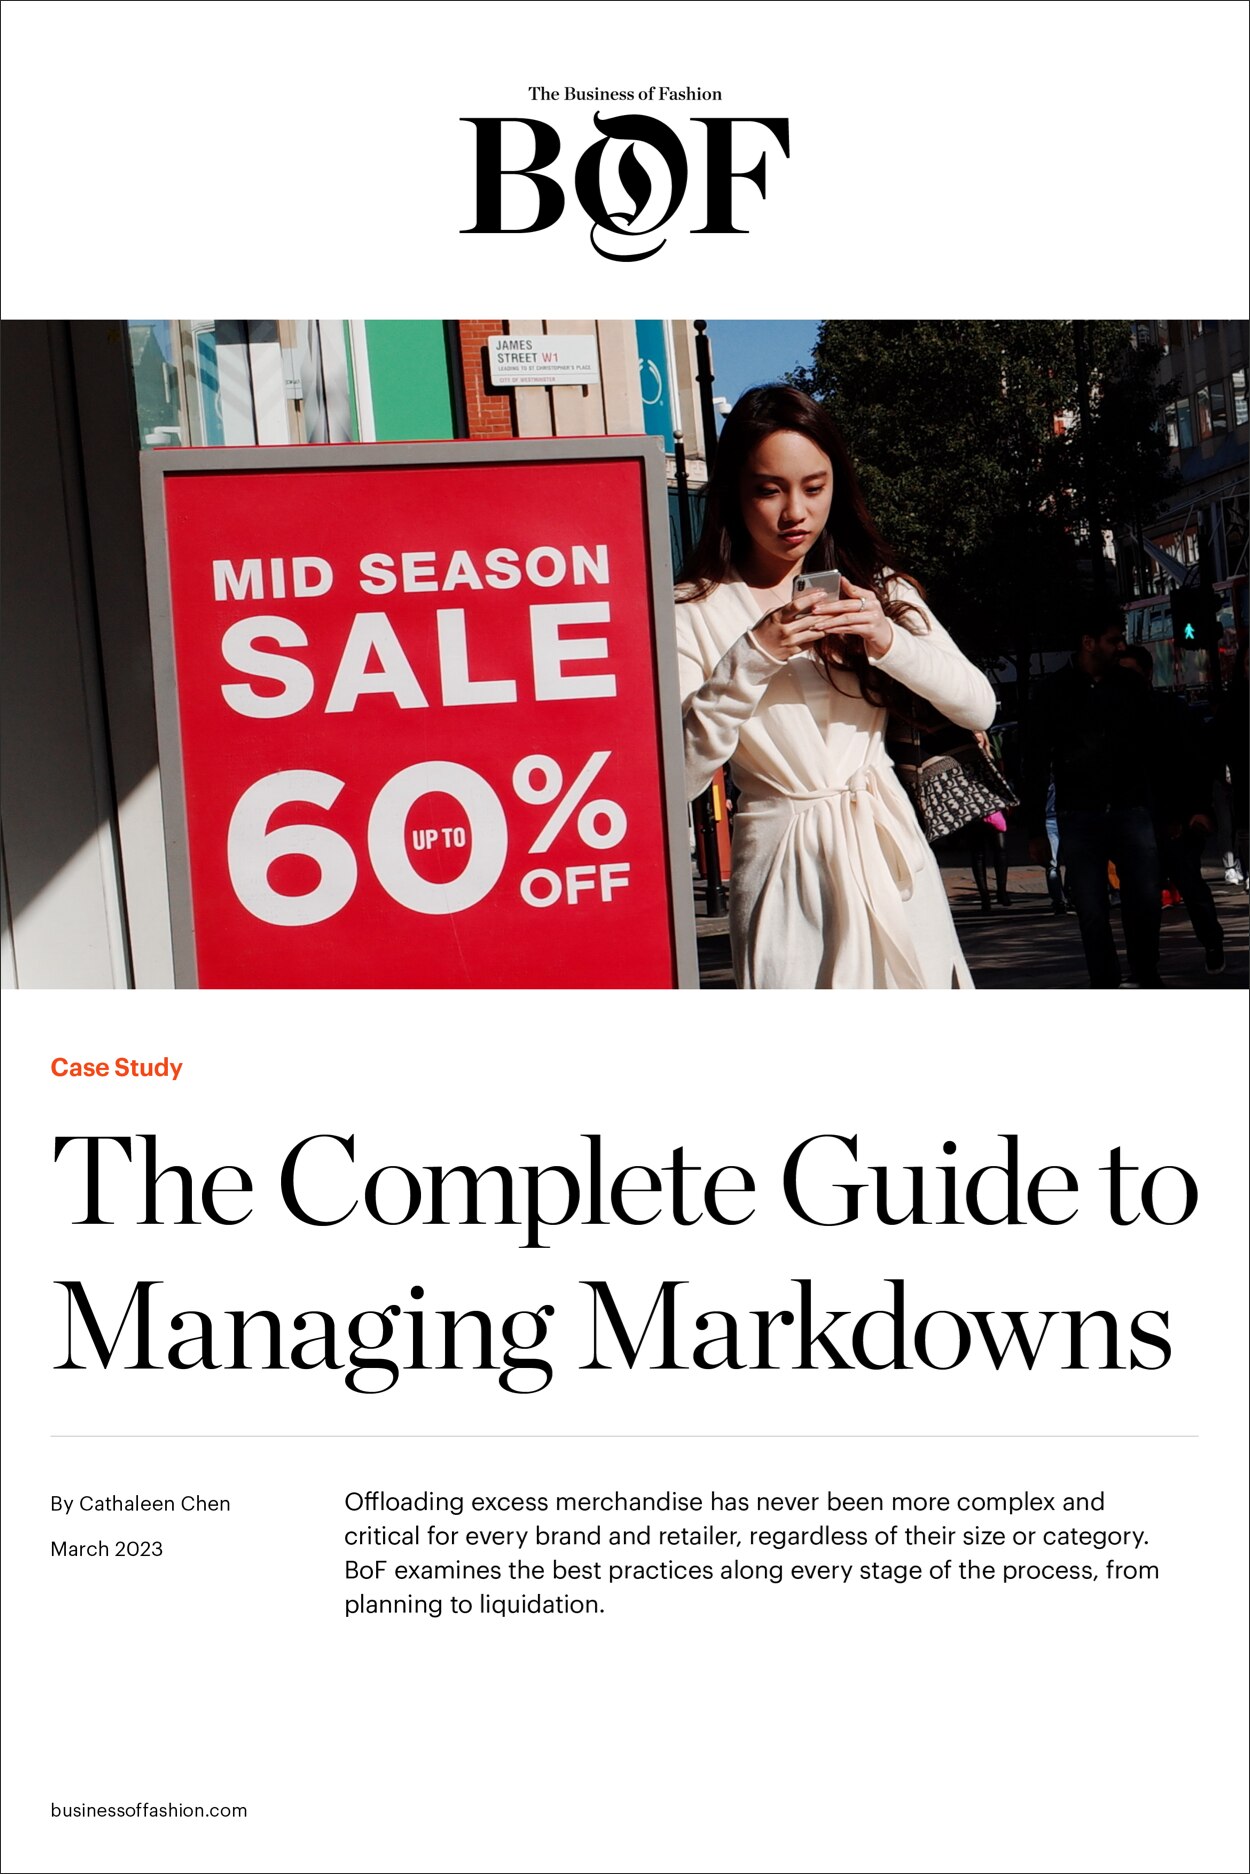 The Complete Guide to Managing Markdowns | Case Study